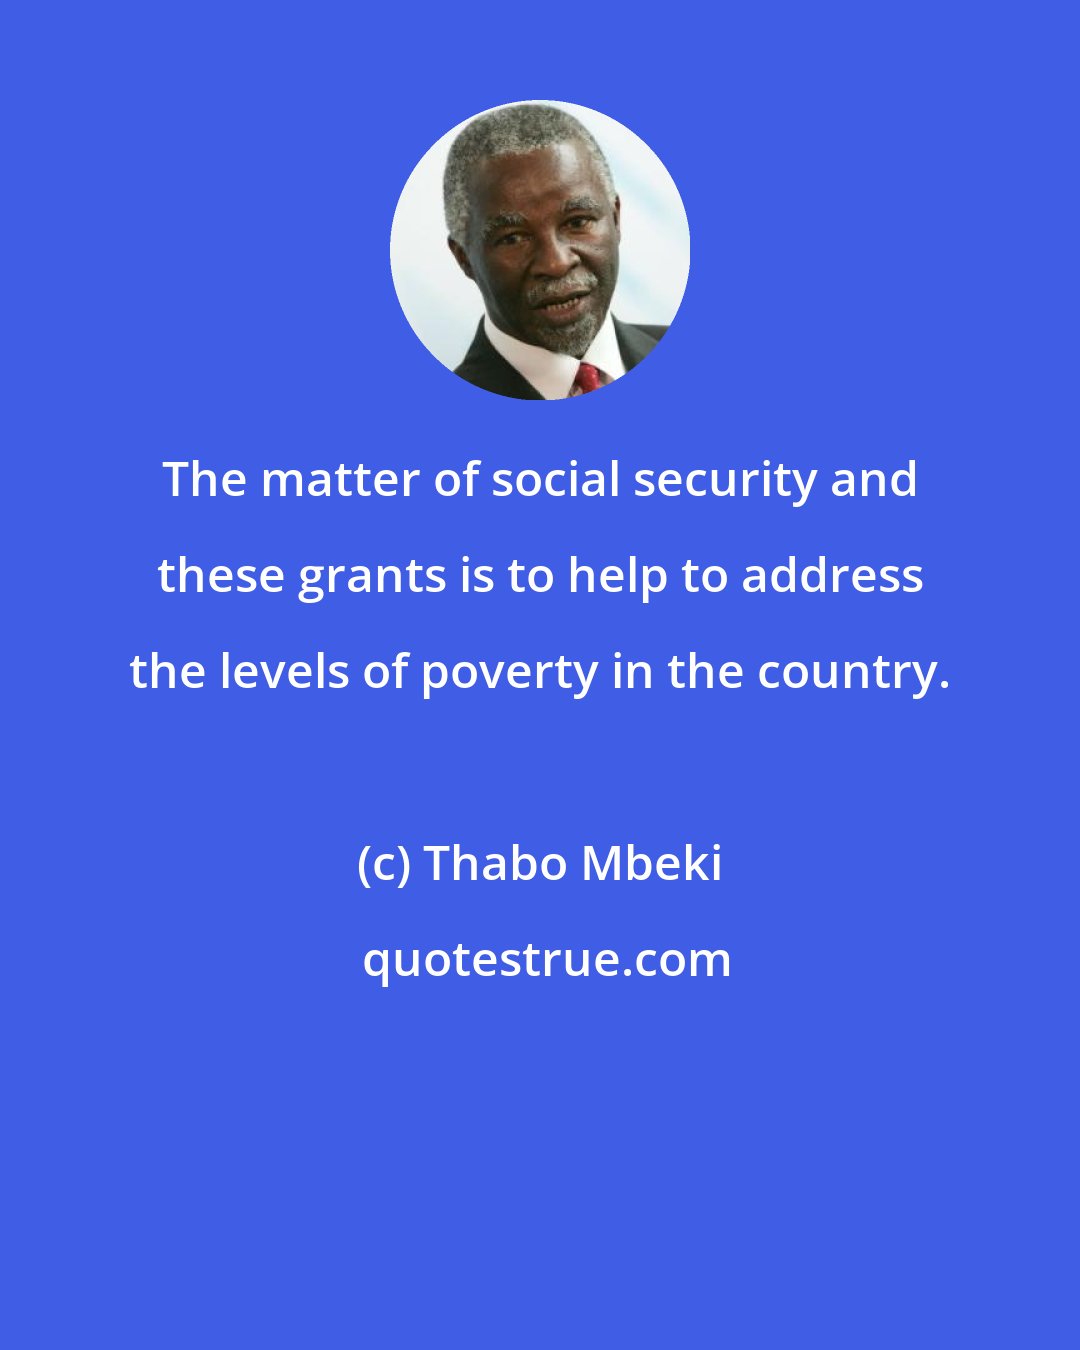 Thabo Mbeki: The matter of social security and these grants is to help to address the levels of poverty in the country.